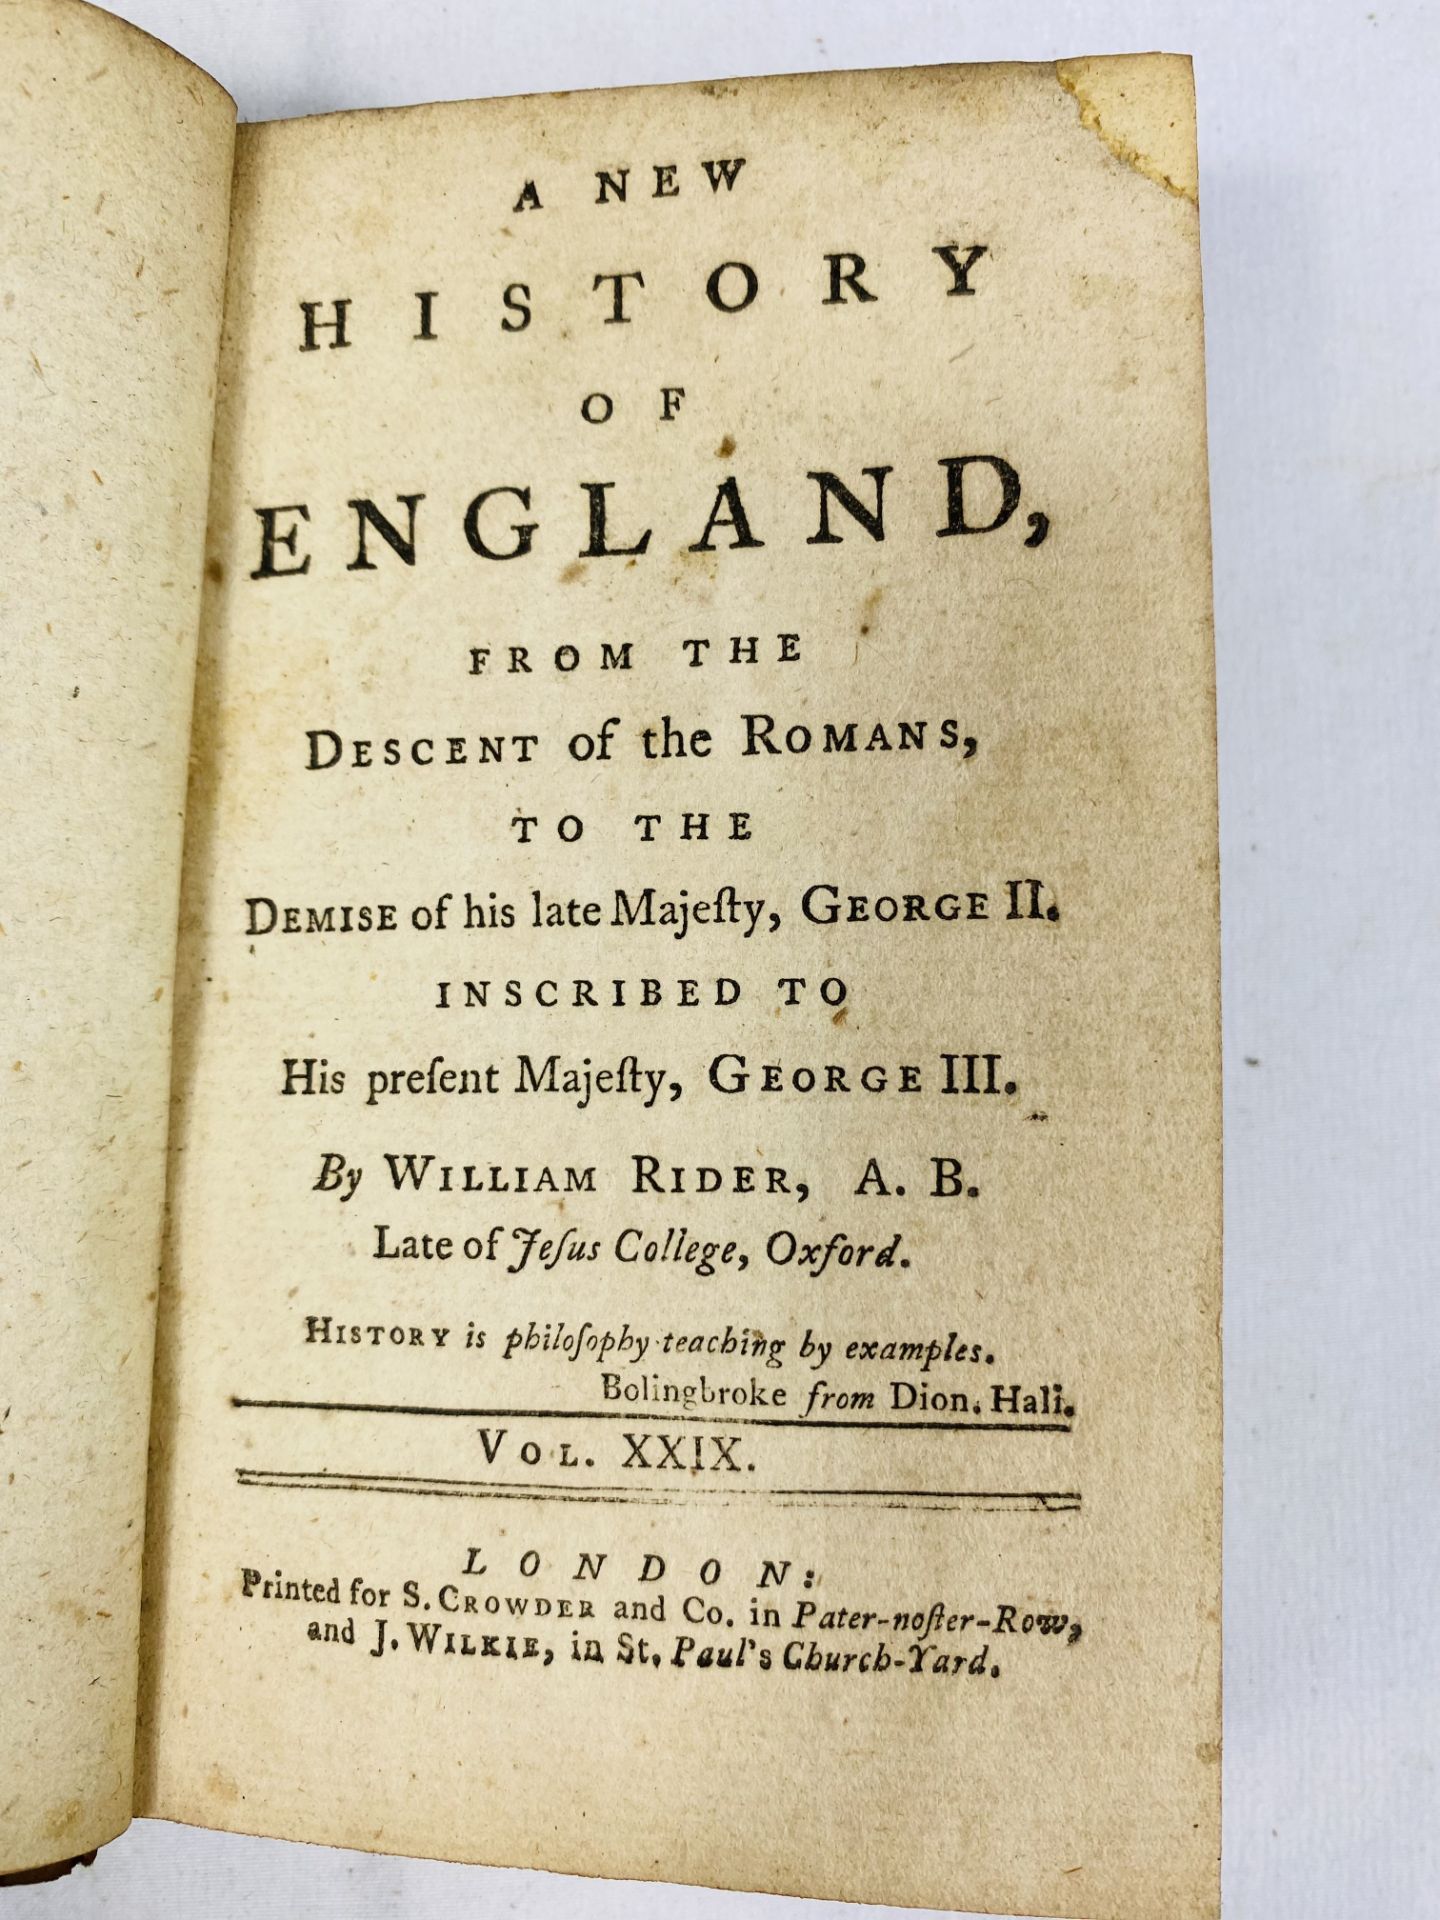 A New History of England by William Rider - Image 2 of 4